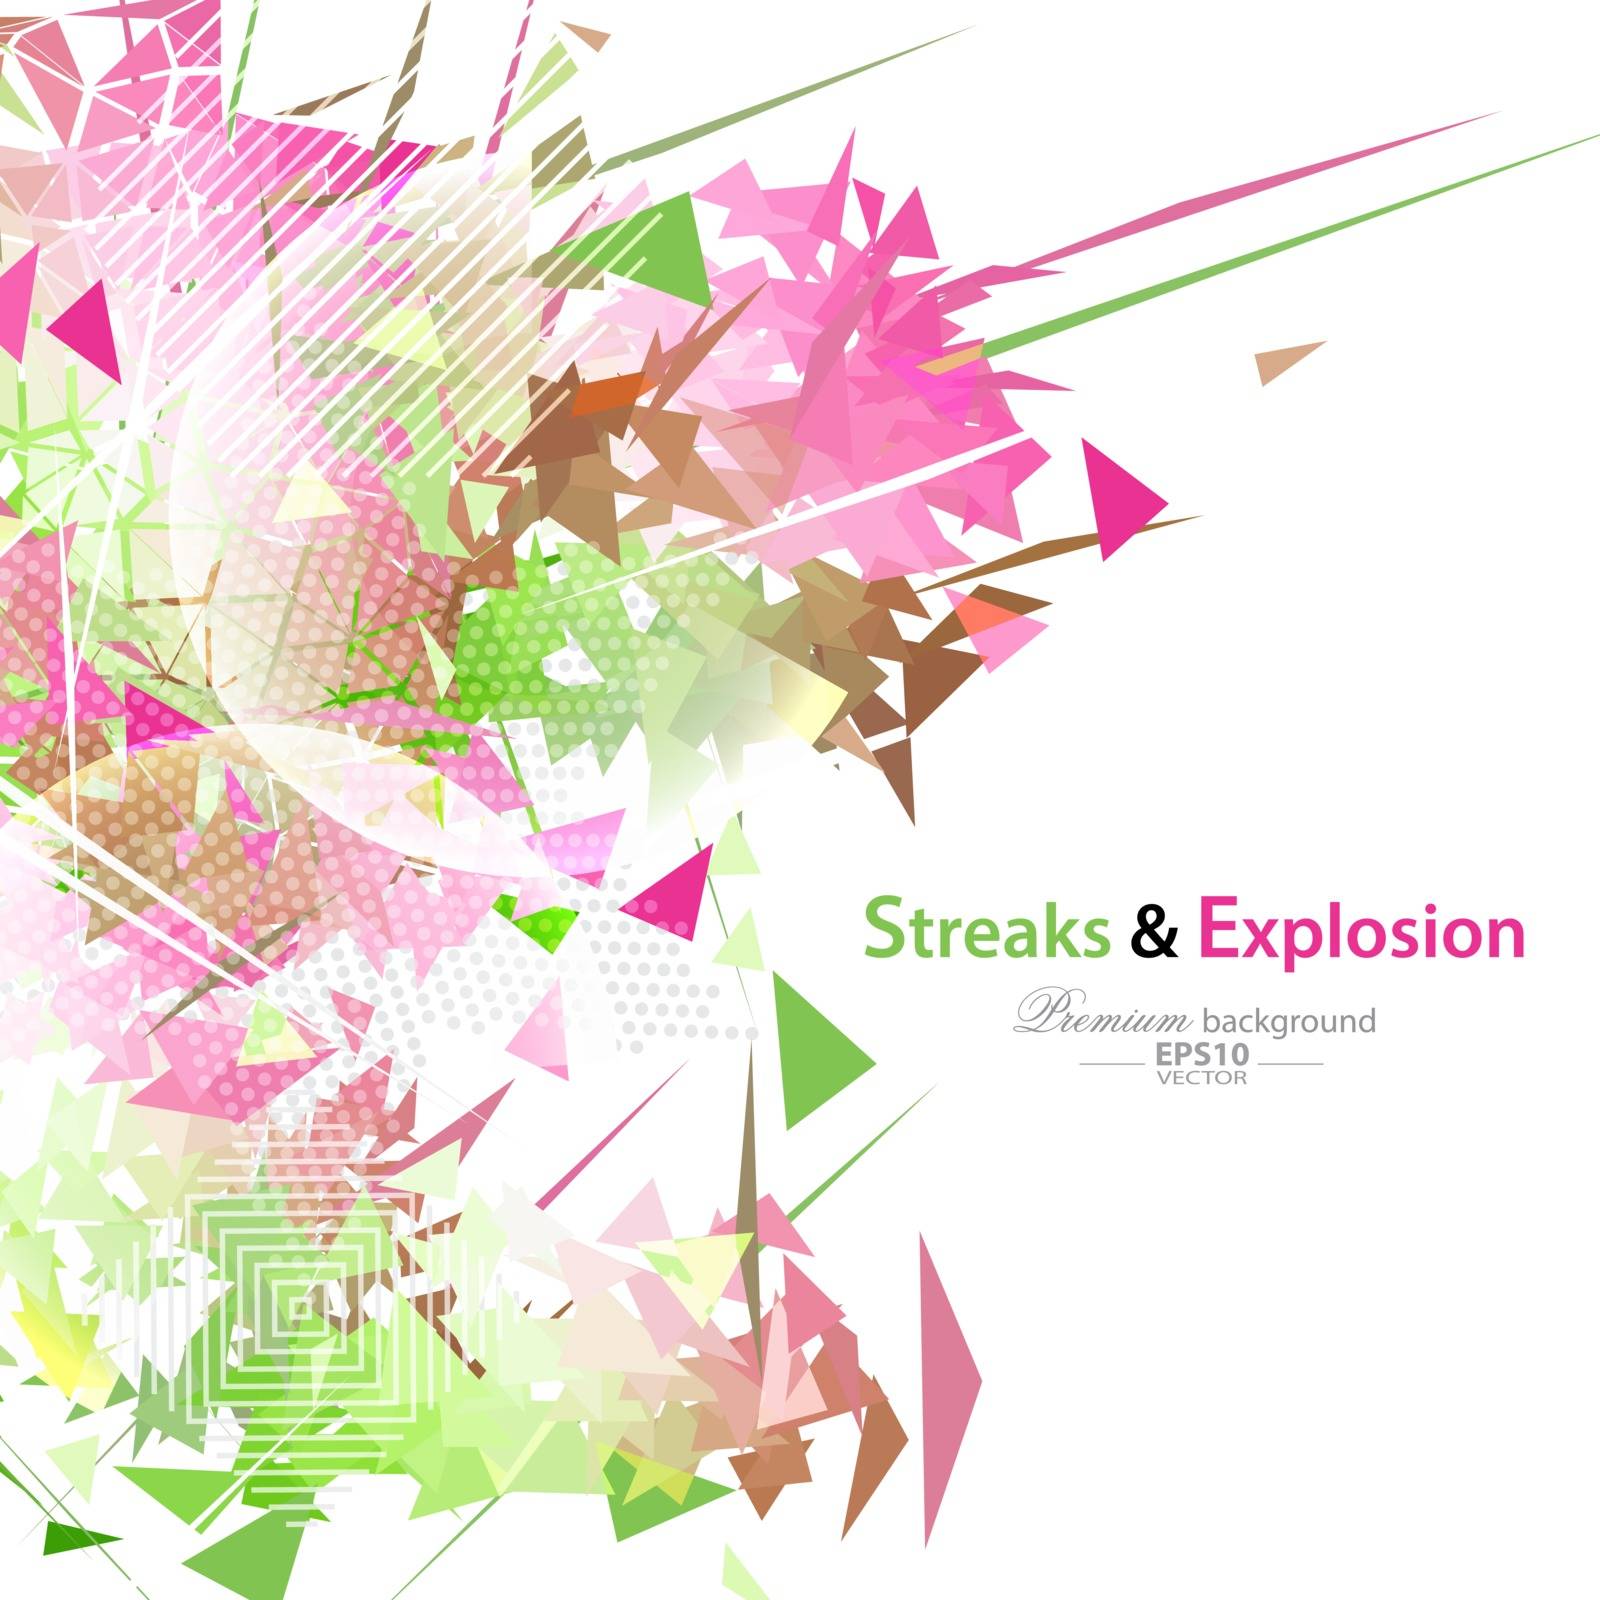 Streaks and explosion background by stocklady